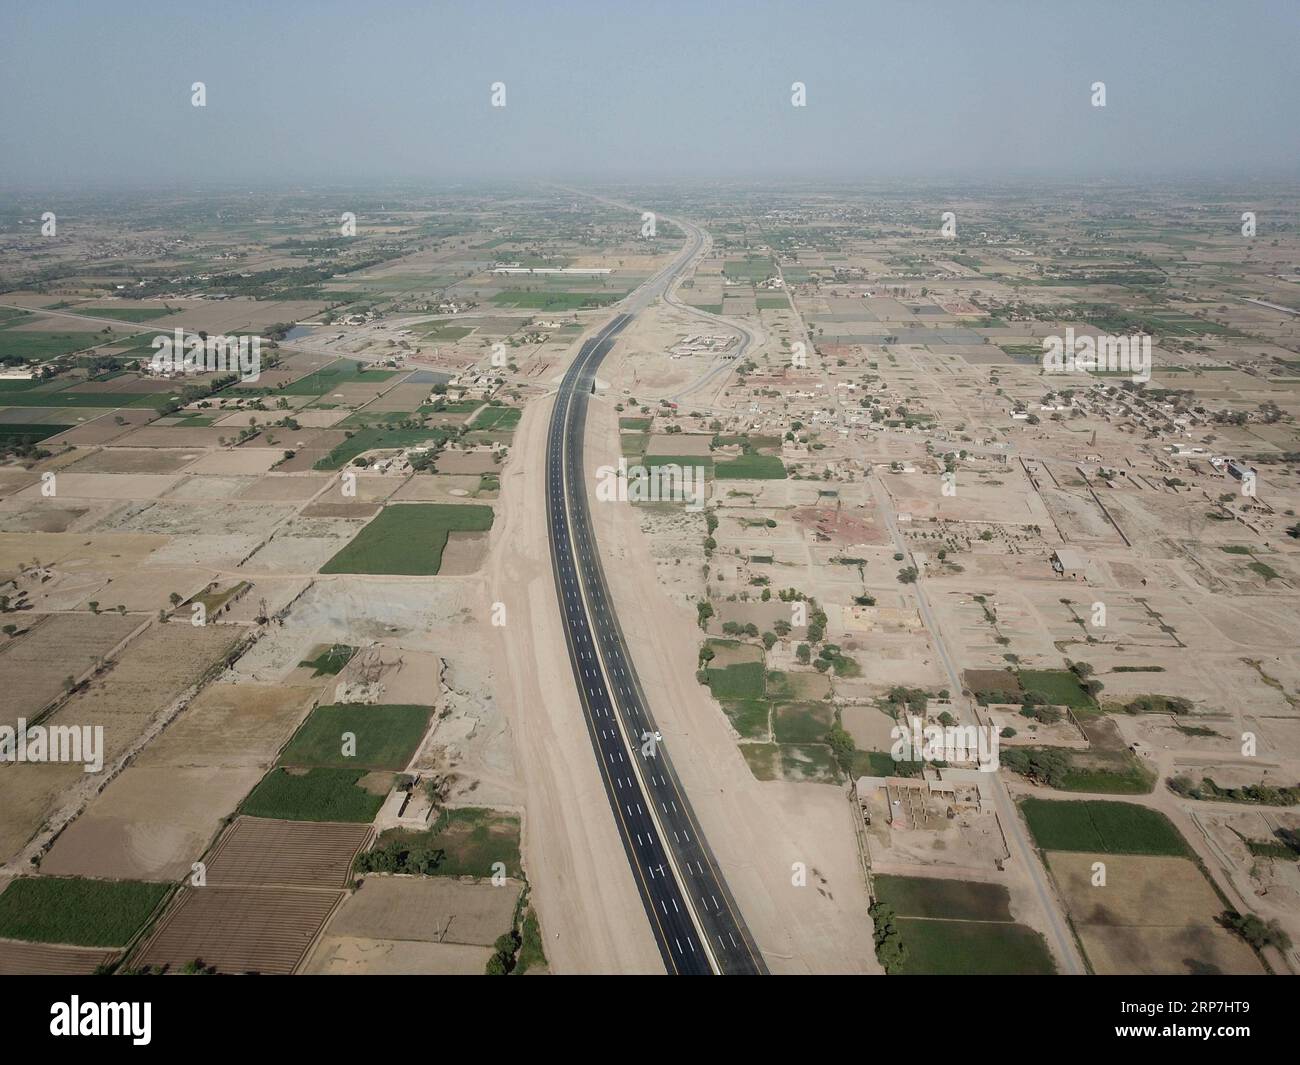 (190207) -- BEIJING, Feb. 7, 2019 -- Photo taken on May 25, 2018 shows the Multan-Shujaabad section of Multan-Sukkur Motorway in Multan, Pakistan. Pakistani Prime Minister Imran Khan said on Wednesday that the China-Pakistan Economic Corridor (CPEC) will bring a host of economic opportunities for the country s southwest Balochistan province, local reports said. During his conversation with political representatives of the Balochistan Awami Party, the prime minister said that development of Gwadar port will open a new era of prosperity in Balochistan by creating vast opportunities for the peopl Stock Photo